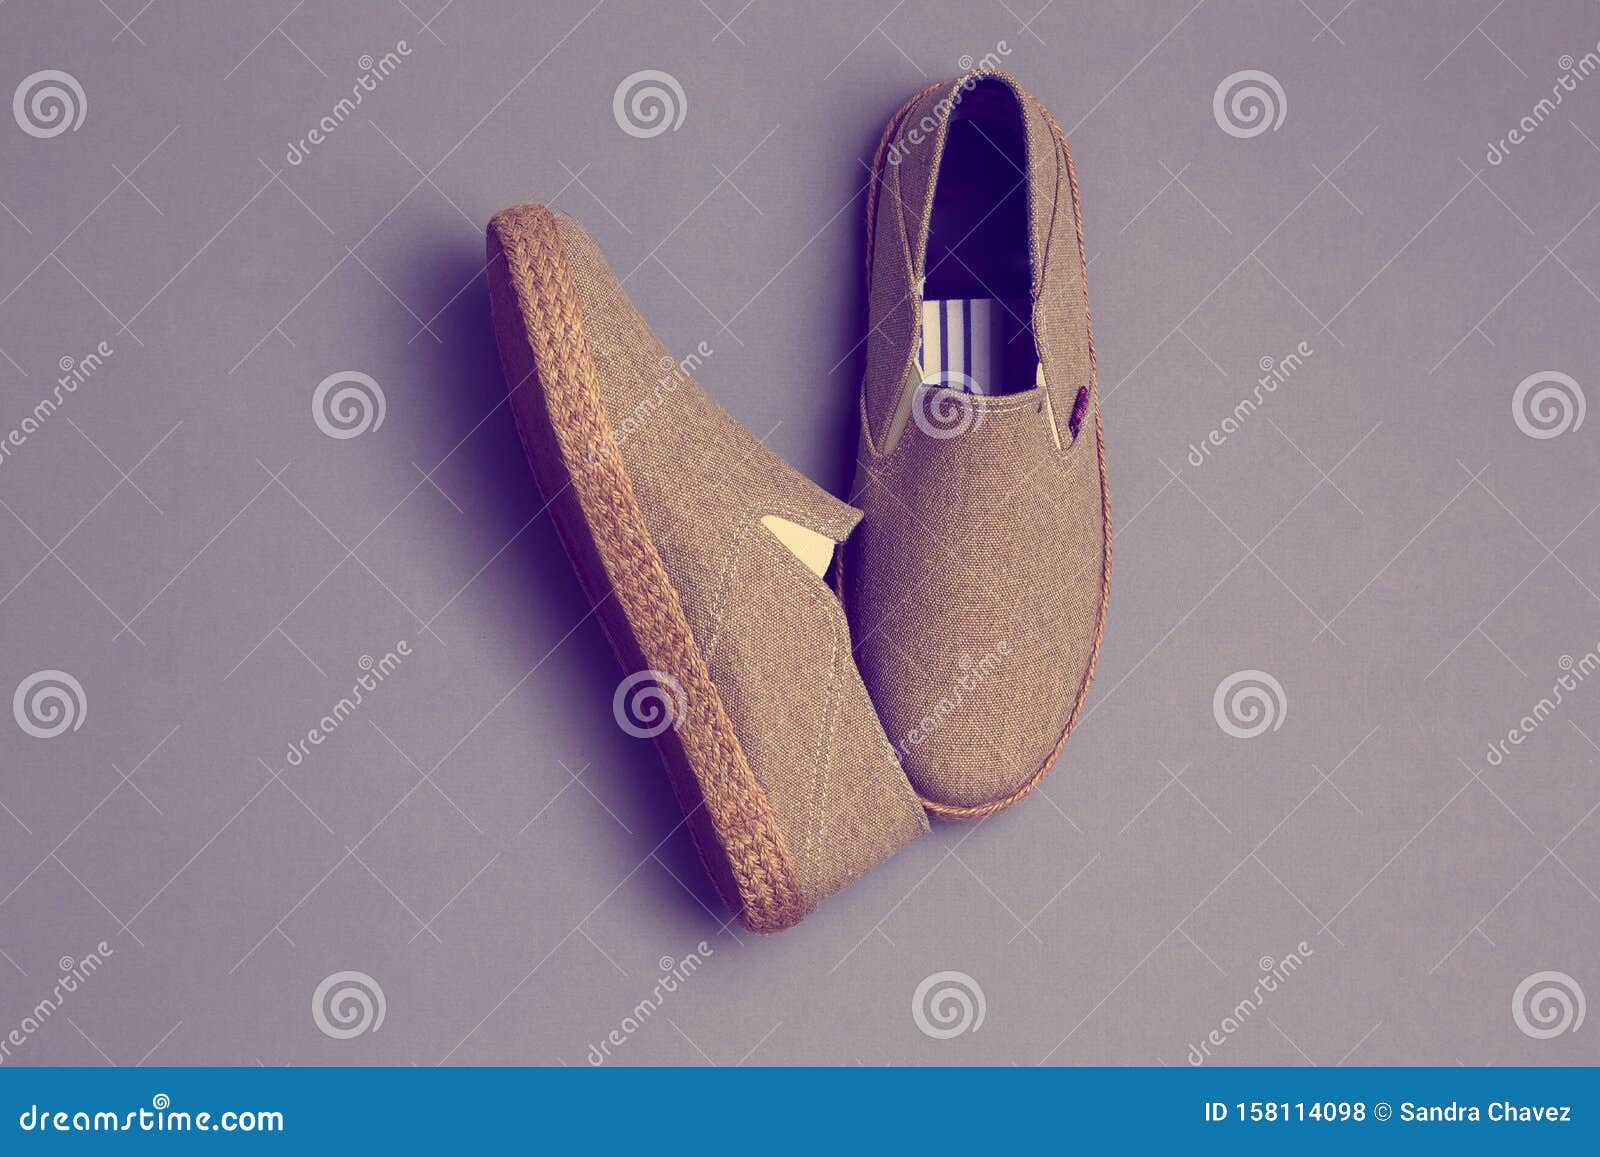 Espadrilles Made of Natural Fibers for Comfortable Walking on Hot Days Stock Photo - Image of linen, 158114098